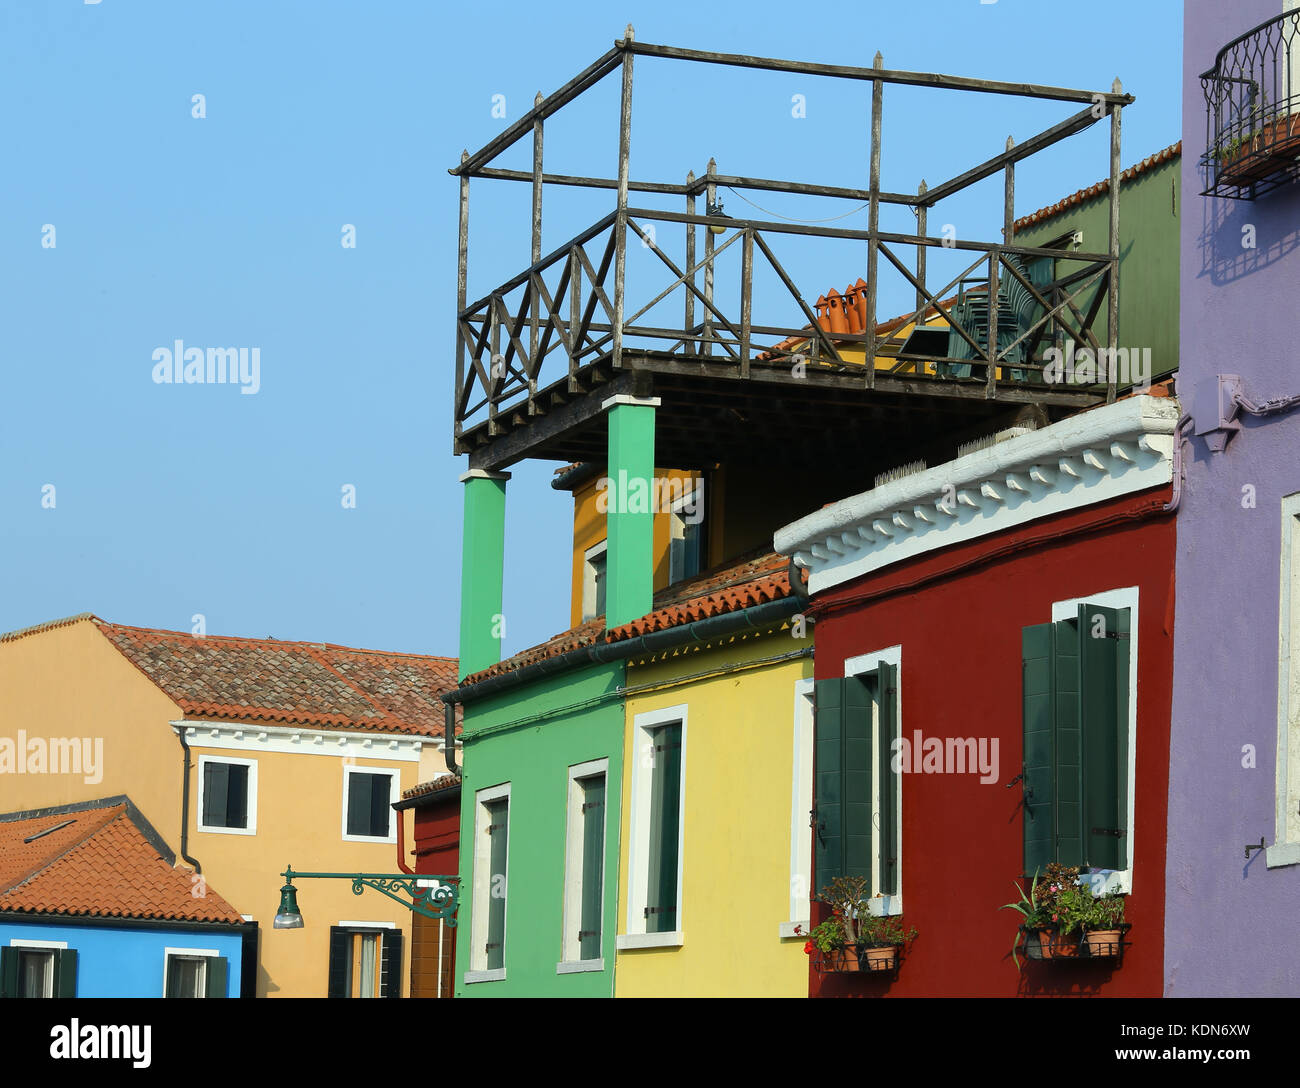 big roof terrace also called altana in italian language above the roof of the Venetian house in Northen Italy Stock Photo